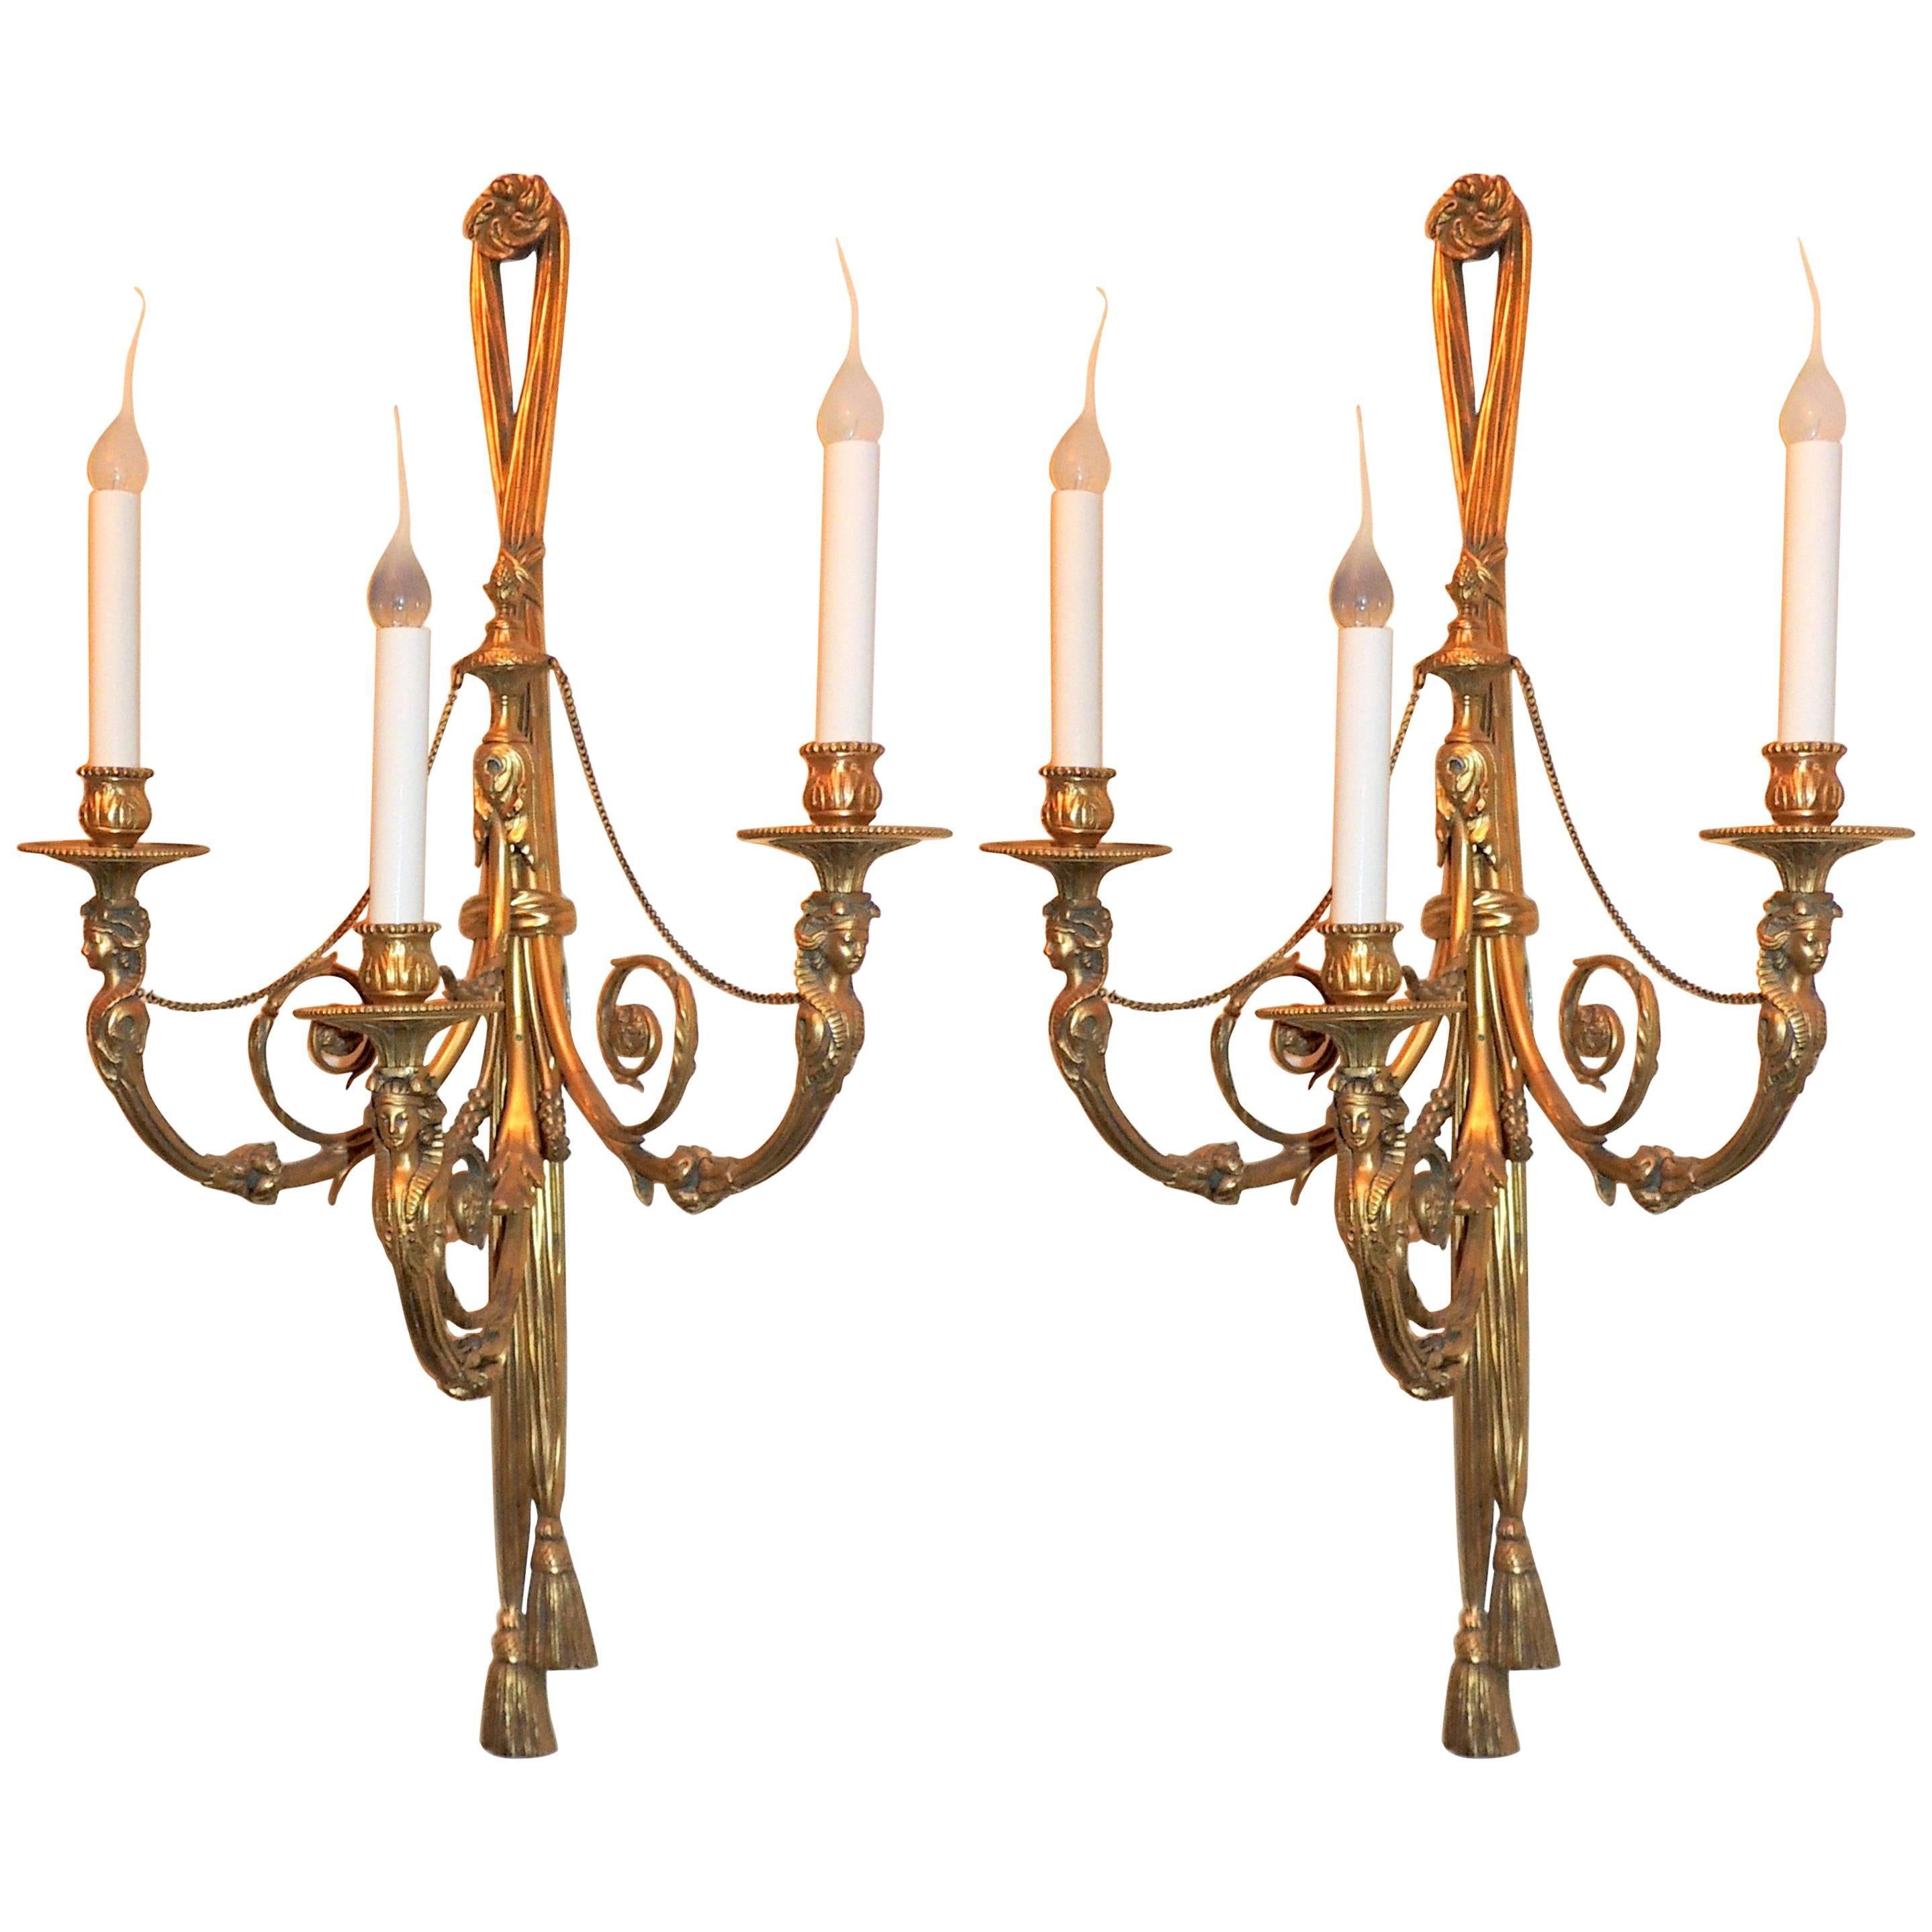 Wonderful Pair of French Large Bronze Empire Regency Lady Figural Tassel Sconces For Sale